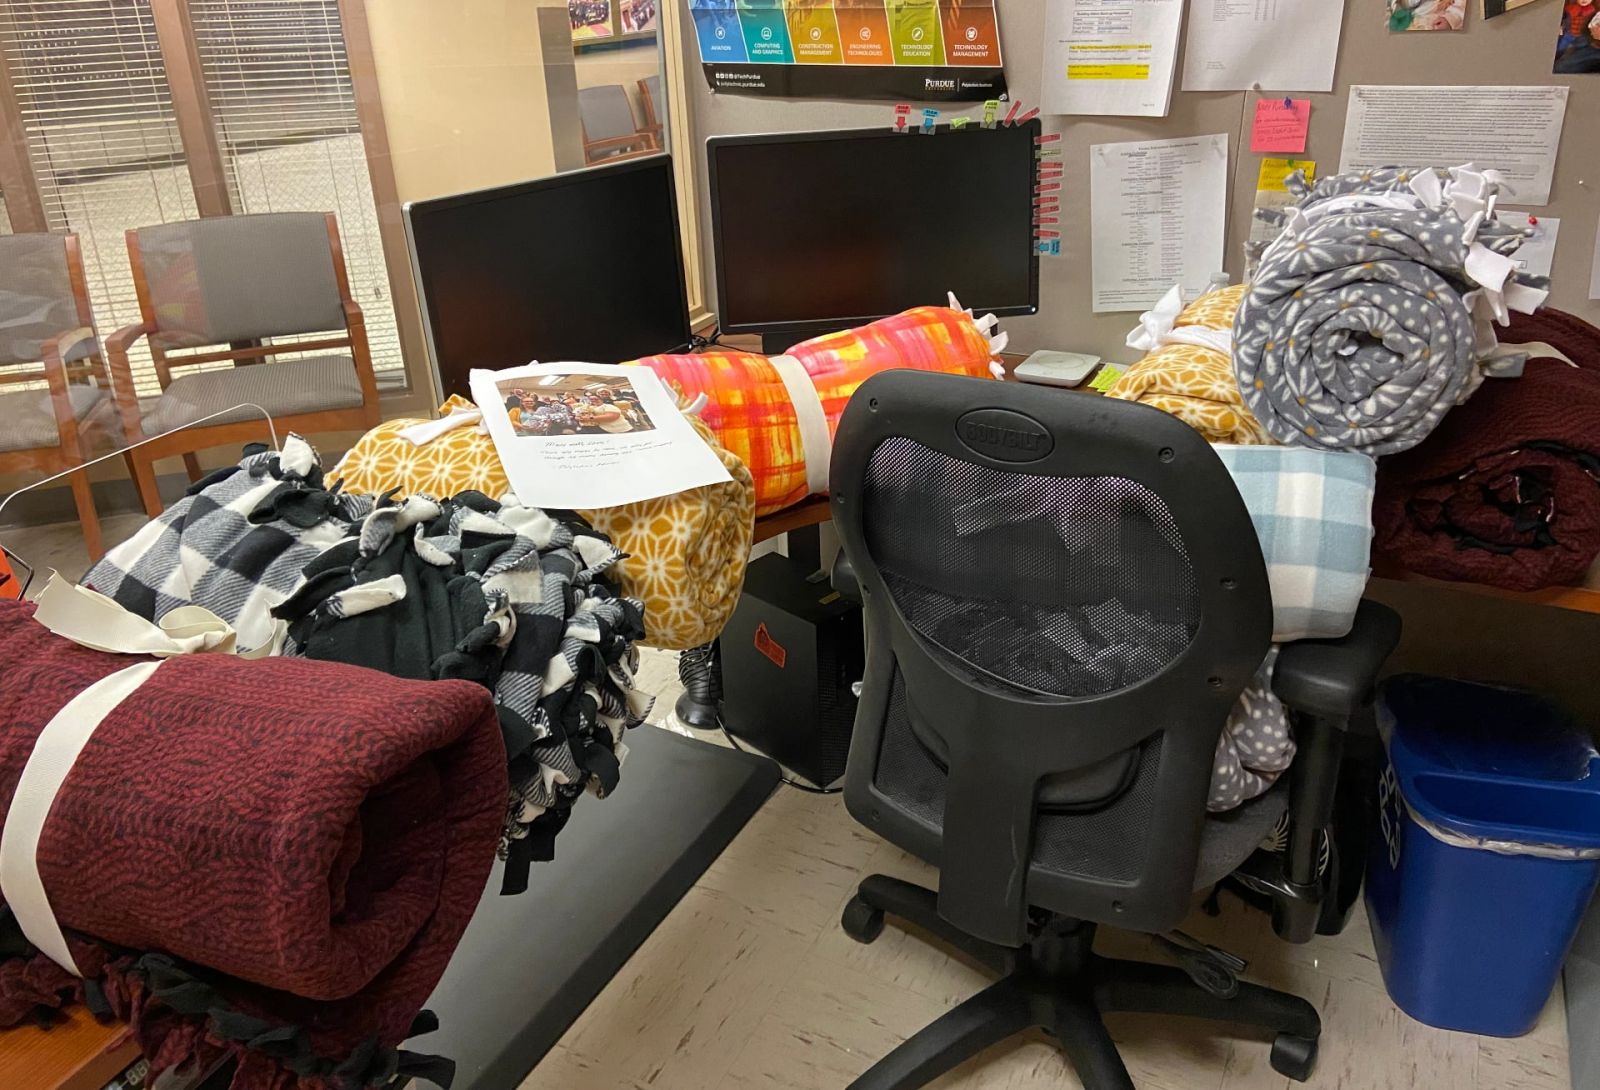 What a surprise! LaGrange arrived to work to find handmade blankets scattered across her desk. (Photo provided)